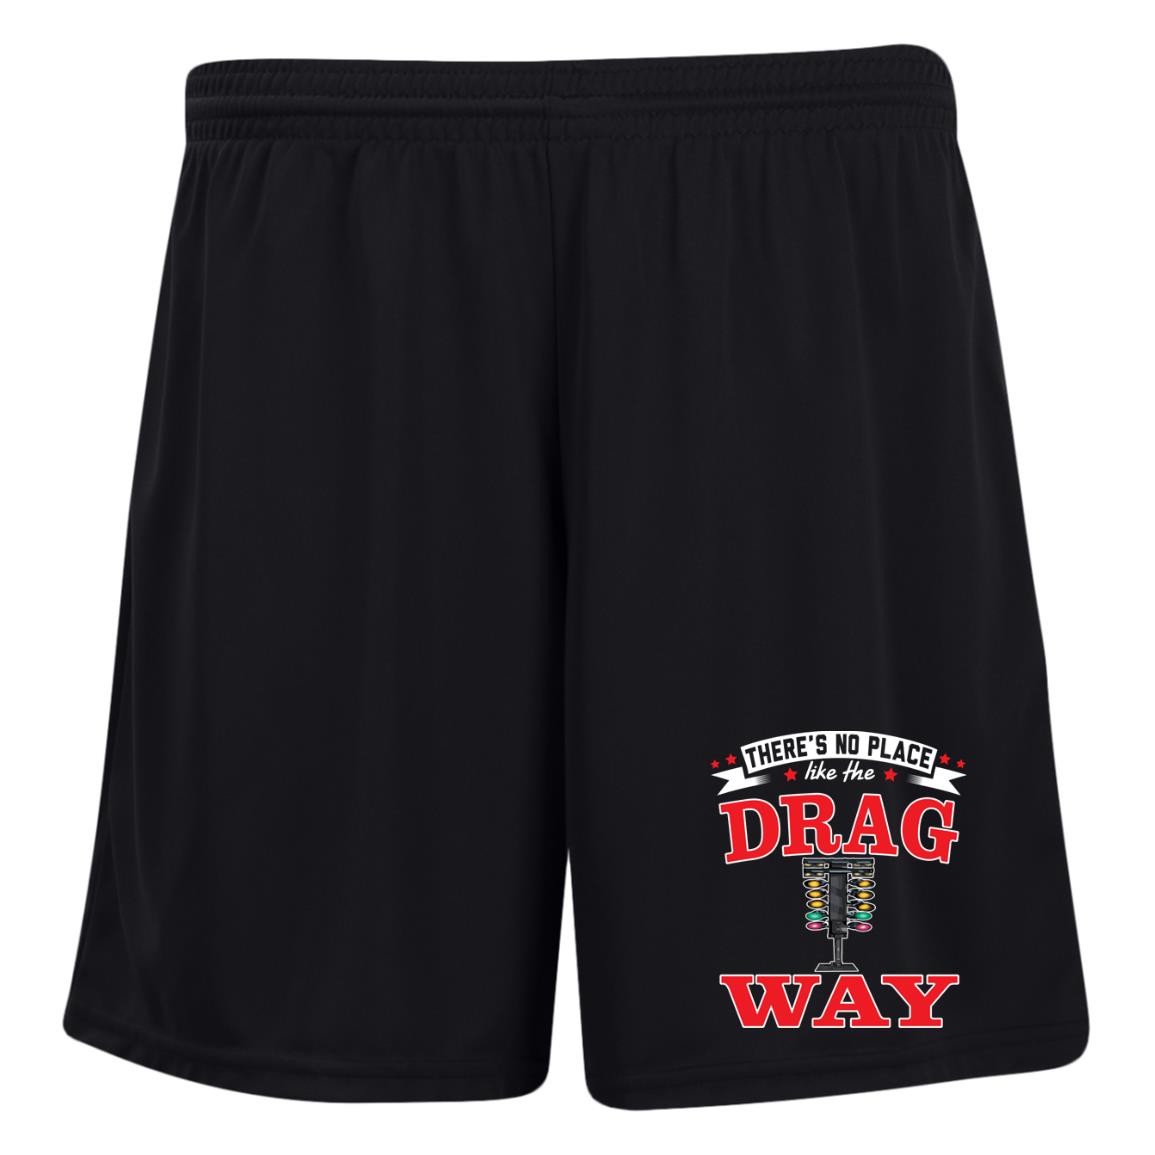 There's No Place Like The Dragway Women's Moisture-Wicking 7 inch Inseam Training Shorts